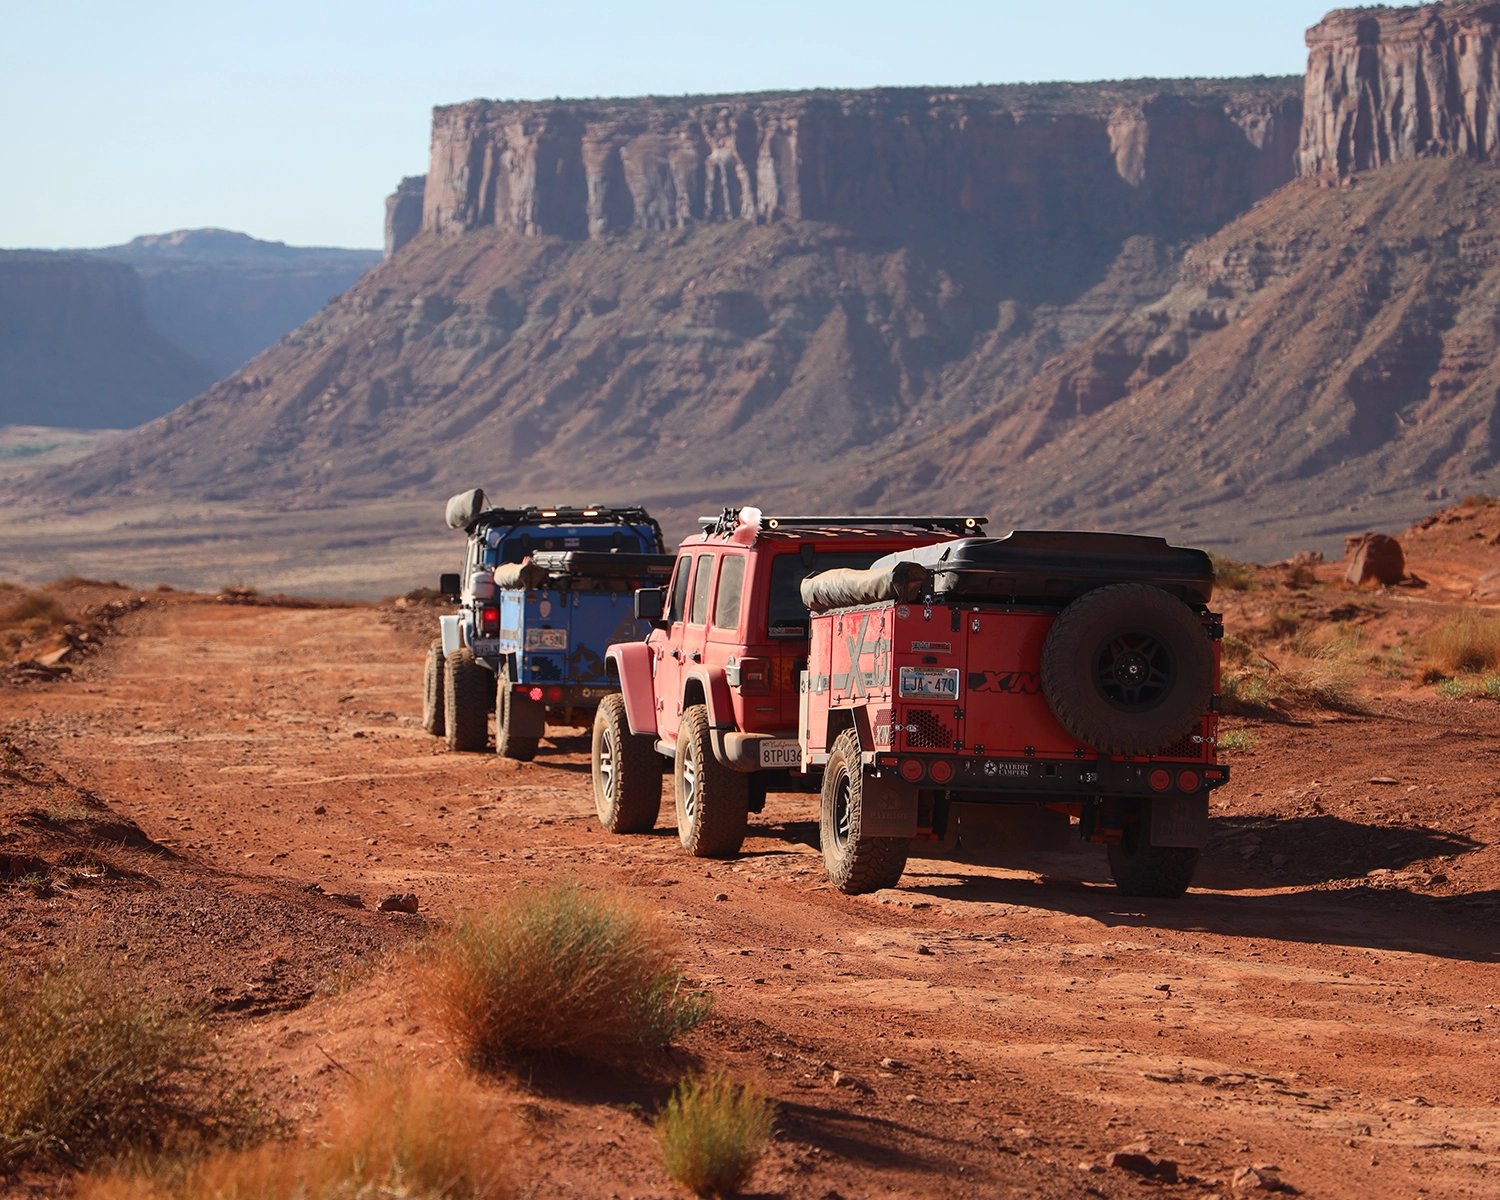 Red and blue jeeps driving off-road in the desert